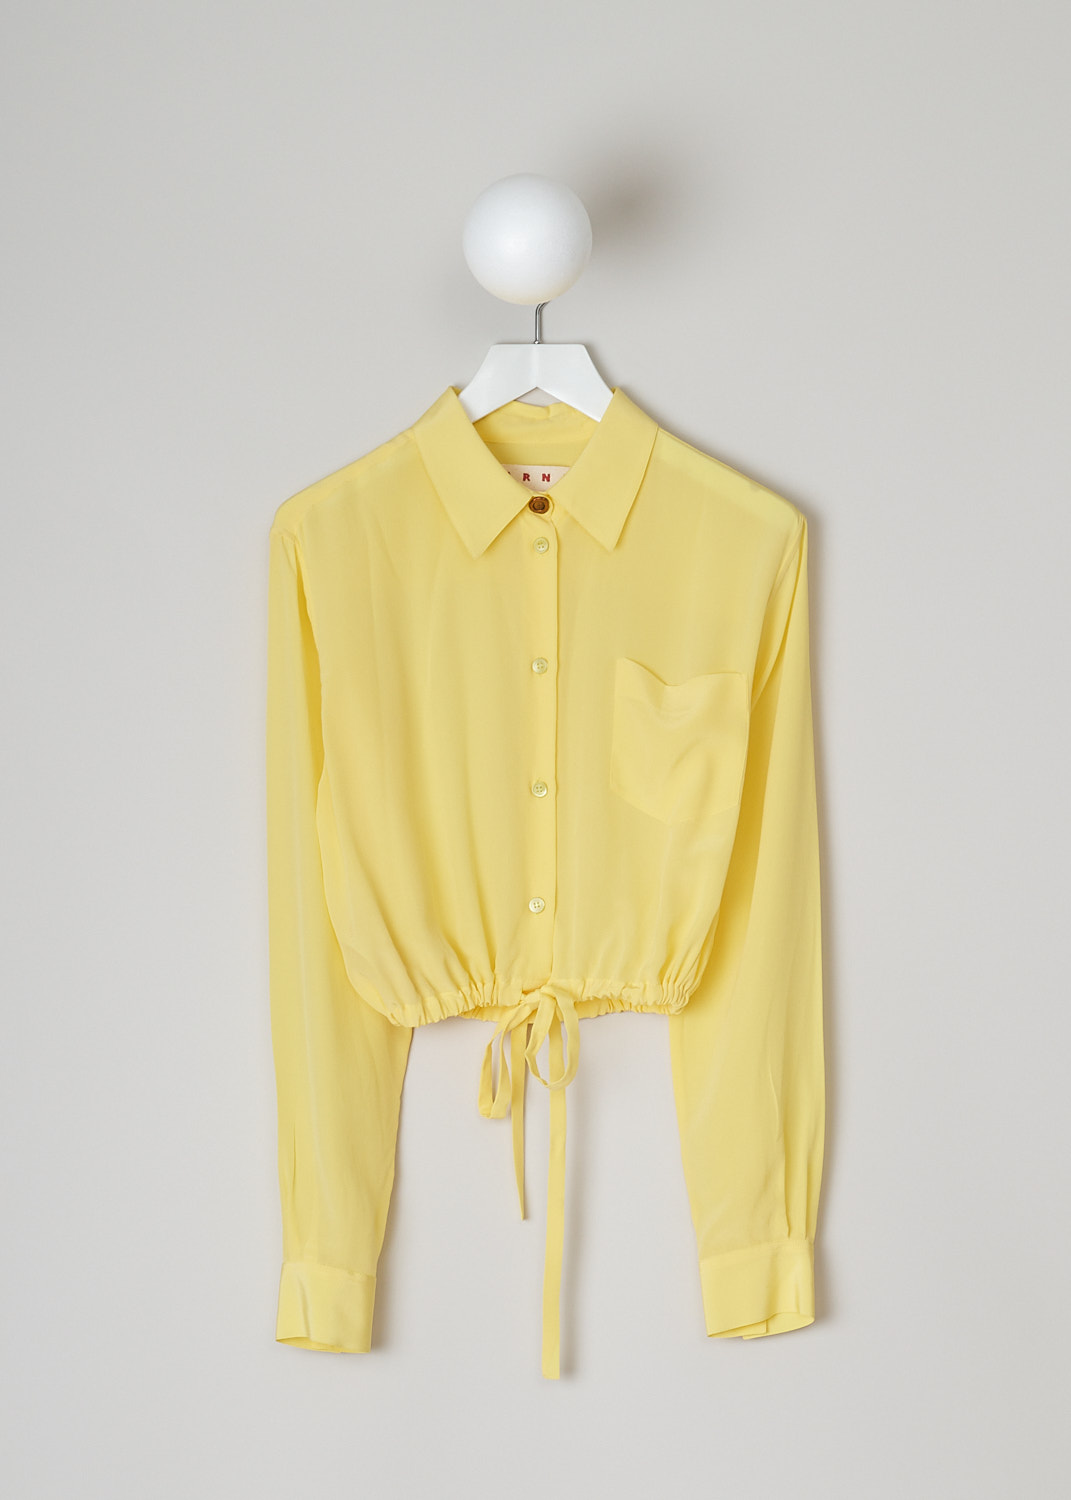 MARNI, LEMON YELLOW SILK CRÊPE DE CHINE BLOUSE, CAMA0526A0_UTSF72_00Y20, Yellow, Front, This cropped silk crêpe de Chine blouse in lemon yellow has a pointed collar and a front button closure, with a bronze-colored top button. The long sleeves cuffs with those same bronze-colored buttons. In the front, the blouse has a single breast pocket. The hemline has a drawstring. 
  
